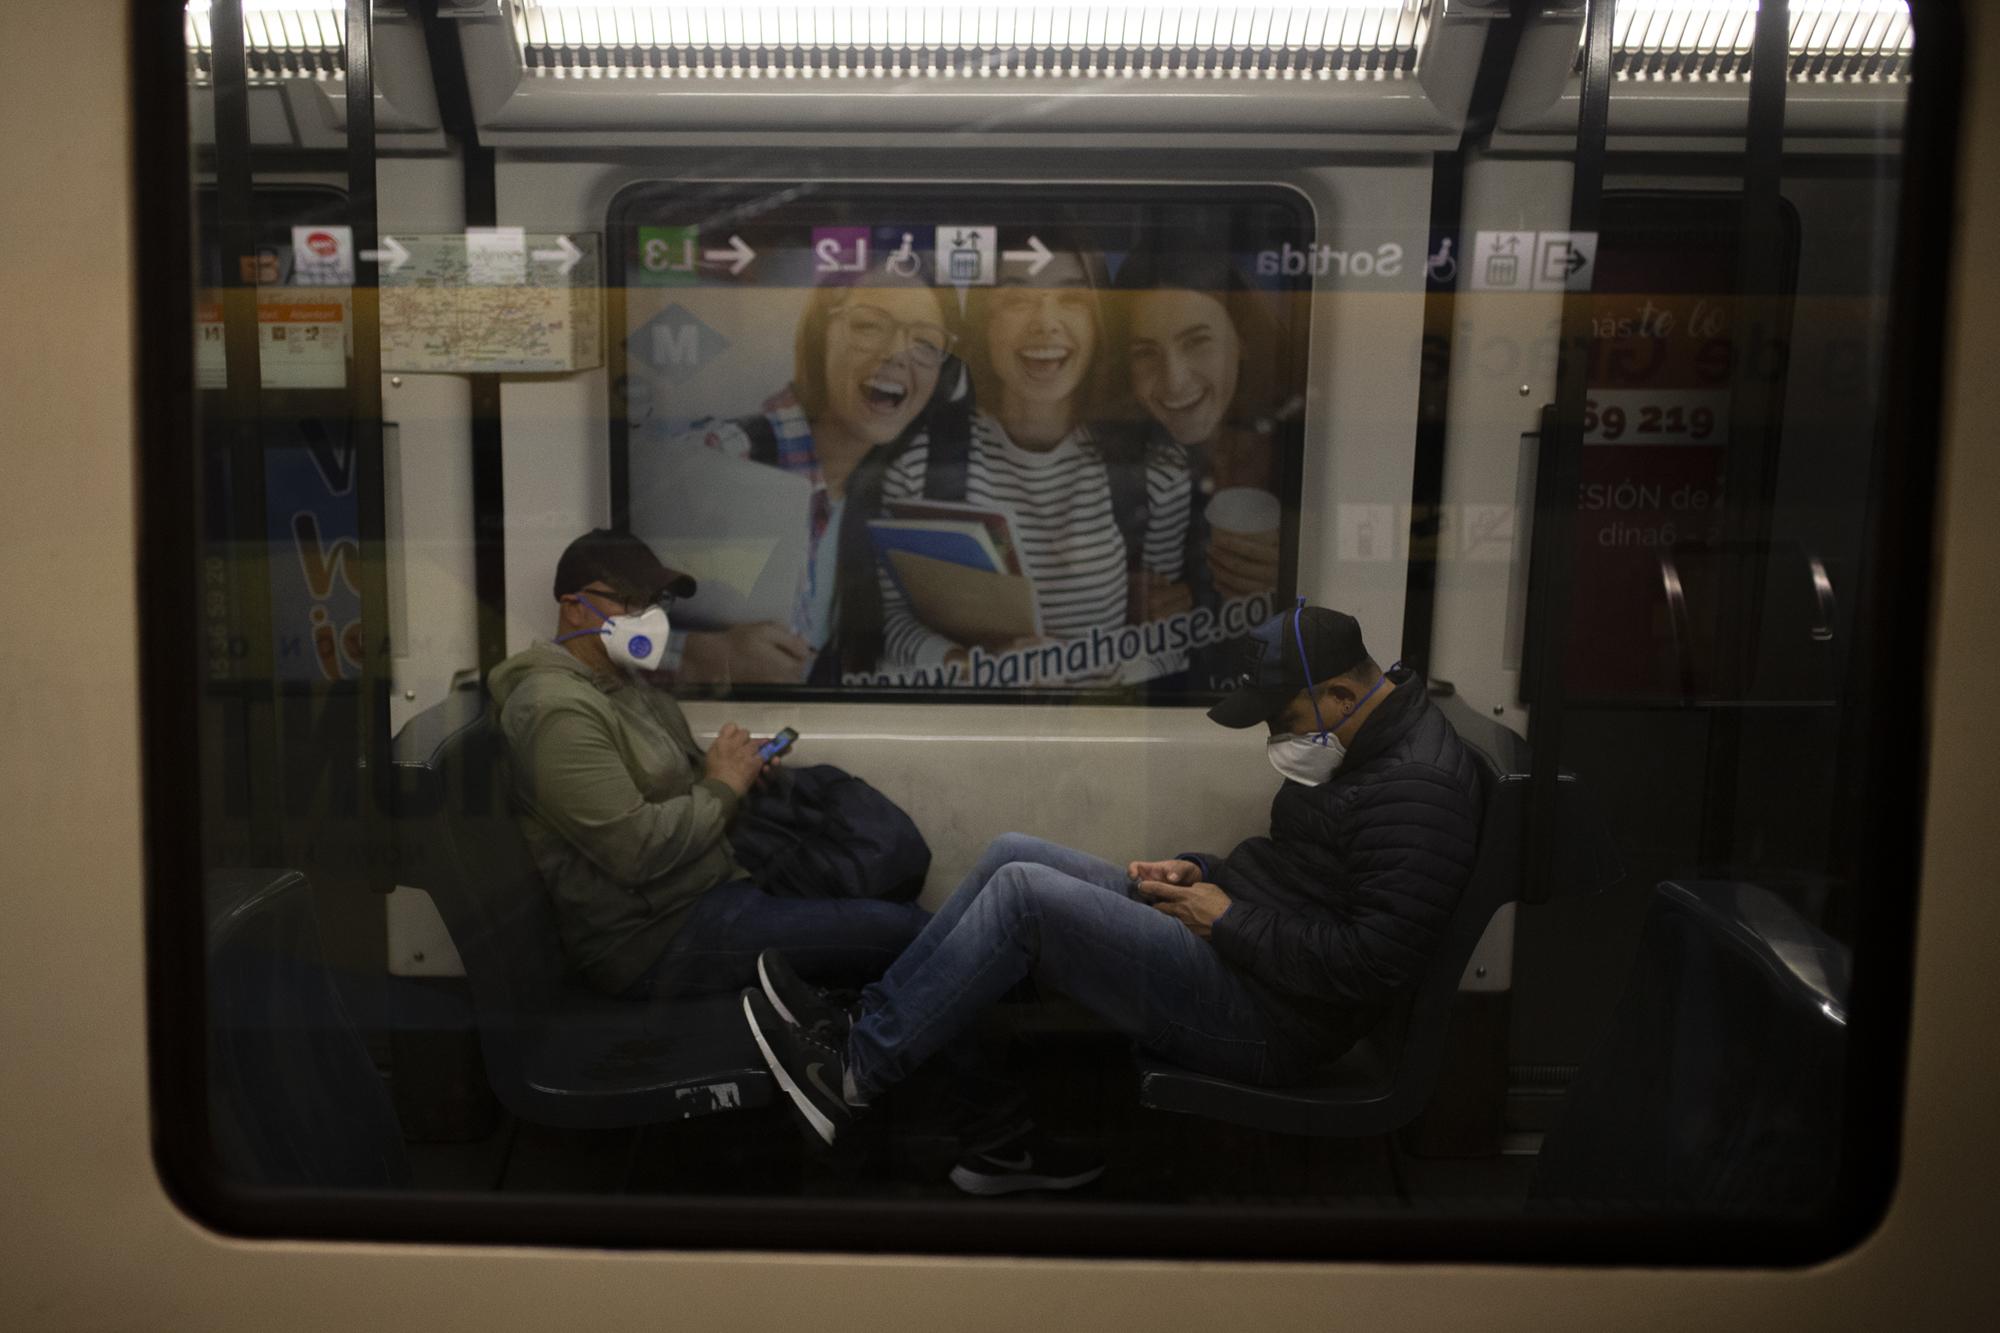 Covid 19 Daily News - Two passenger wearing protective masks sit inside a train...